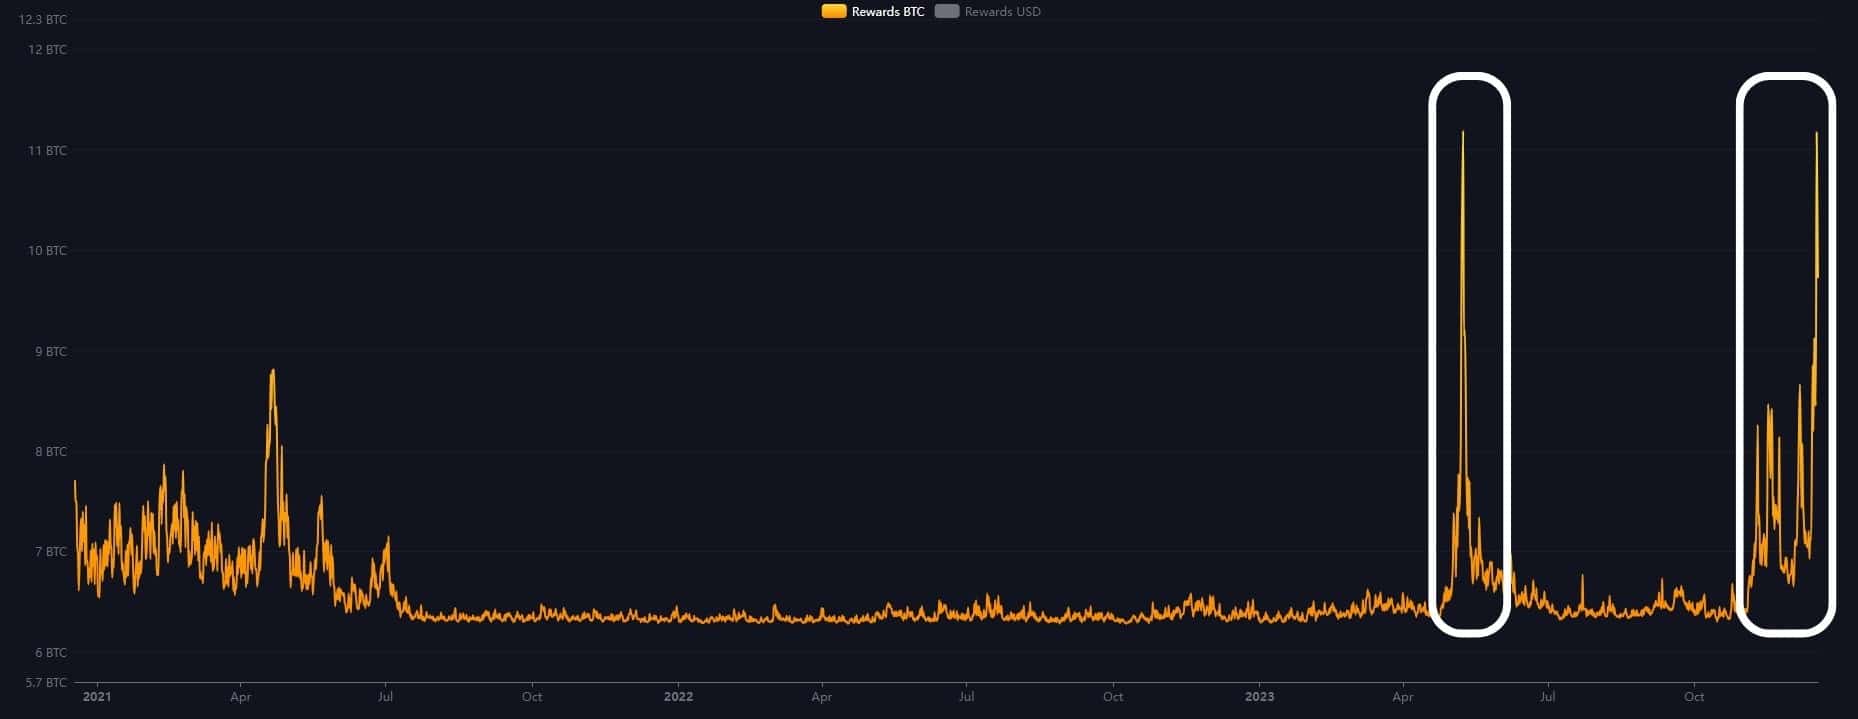 Evolution of the reward per block mined for Bitcoin miners over 3 years (in BTC)